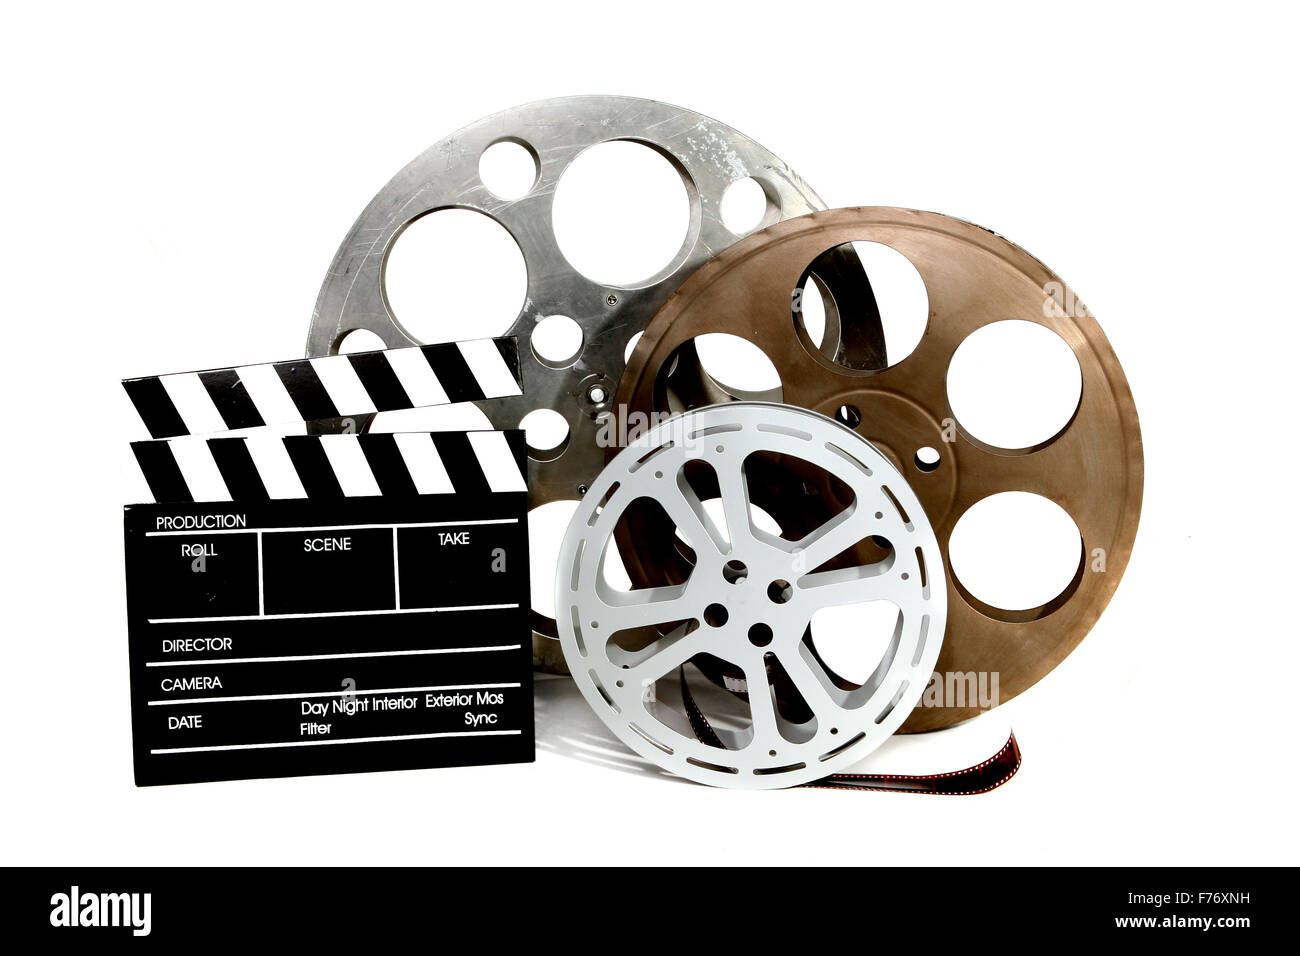 Old Movie Camera, Film Reels And Clapperboards Stock Photo, Picture and  Royalty Free Image. Image 96370540.